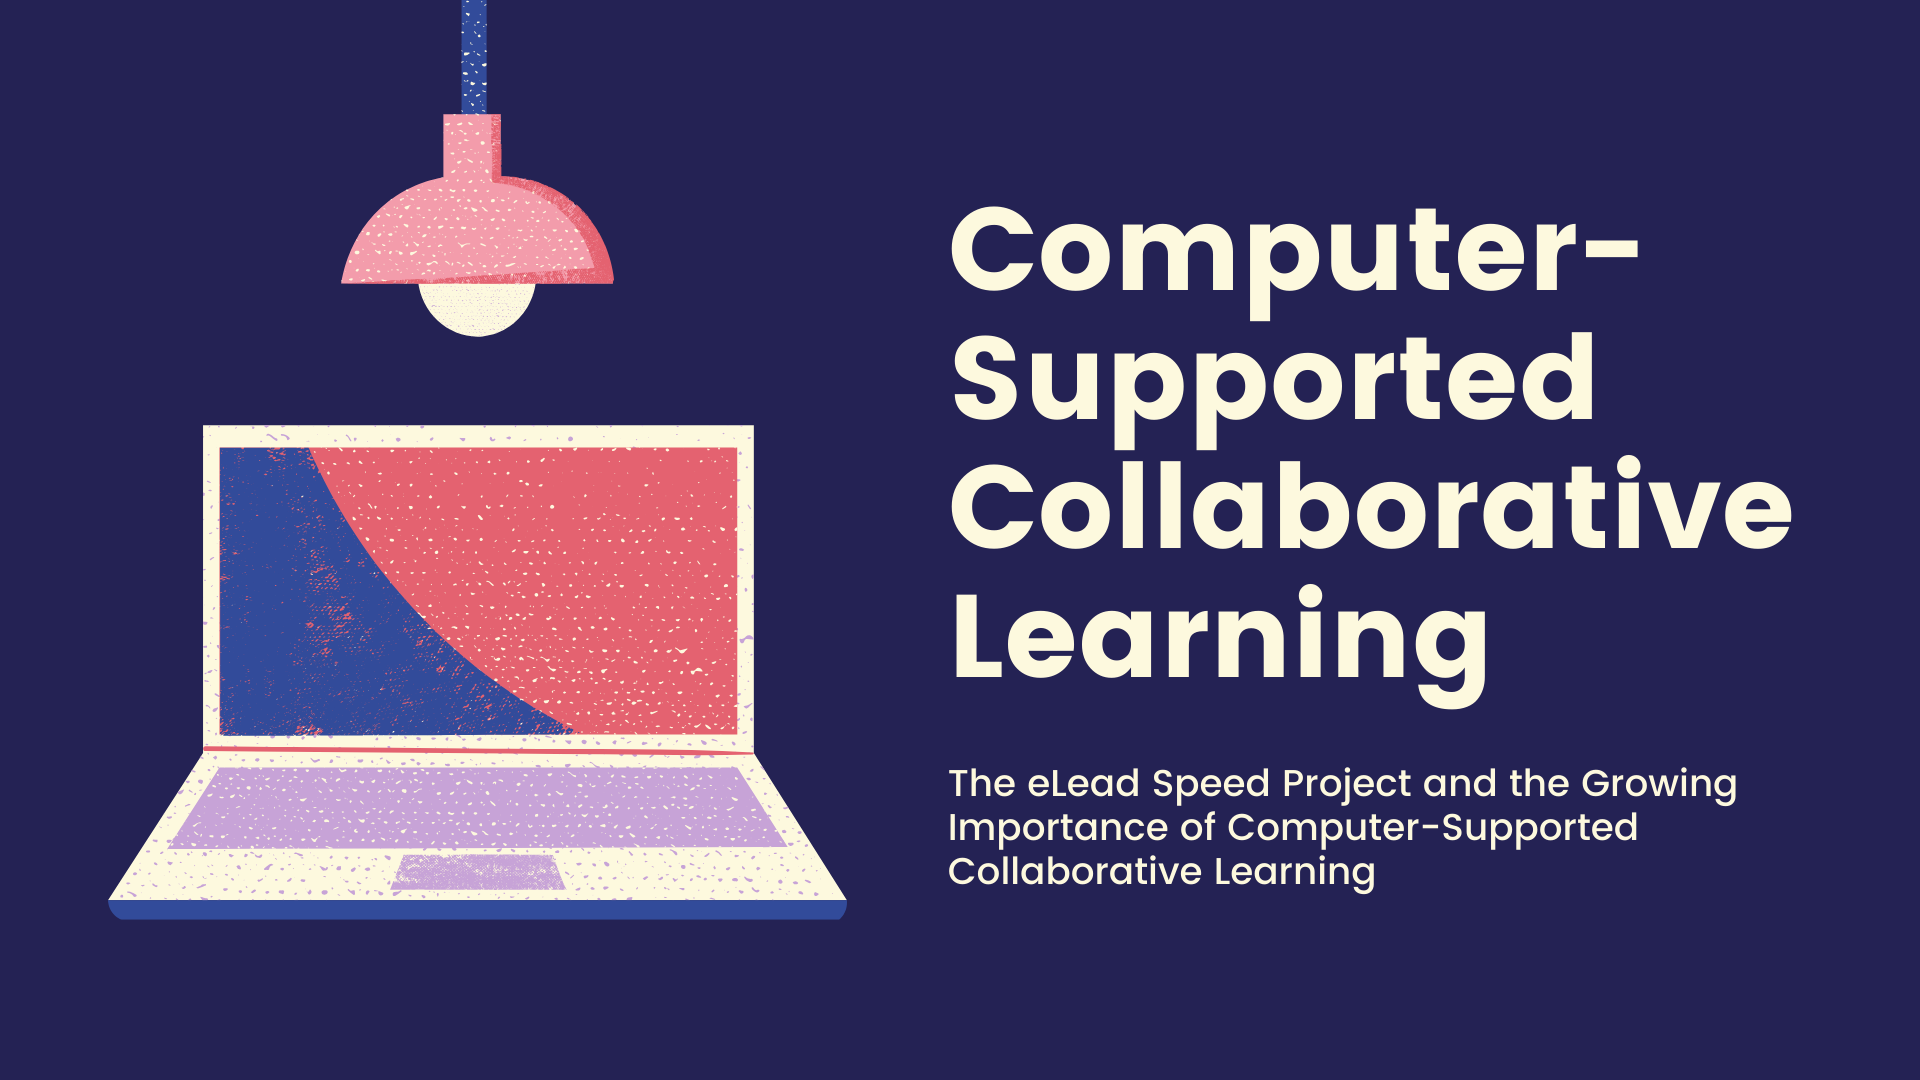 eLead Speed and Computer-Supported Collaborative Learning